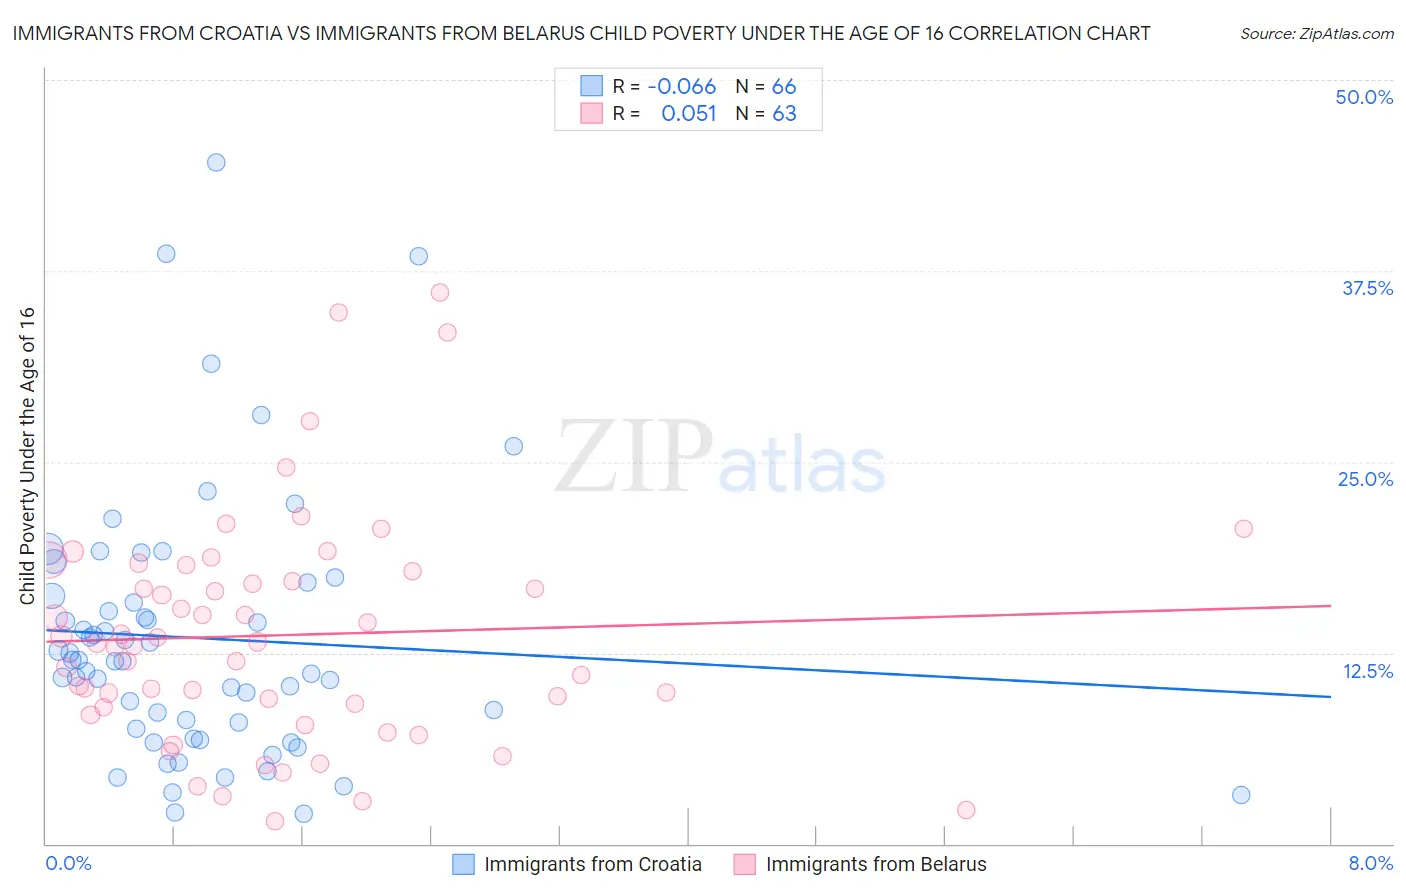 Immigrants from Croatia vs Immigrants from Belarus Child Poverty Under the Age of 16